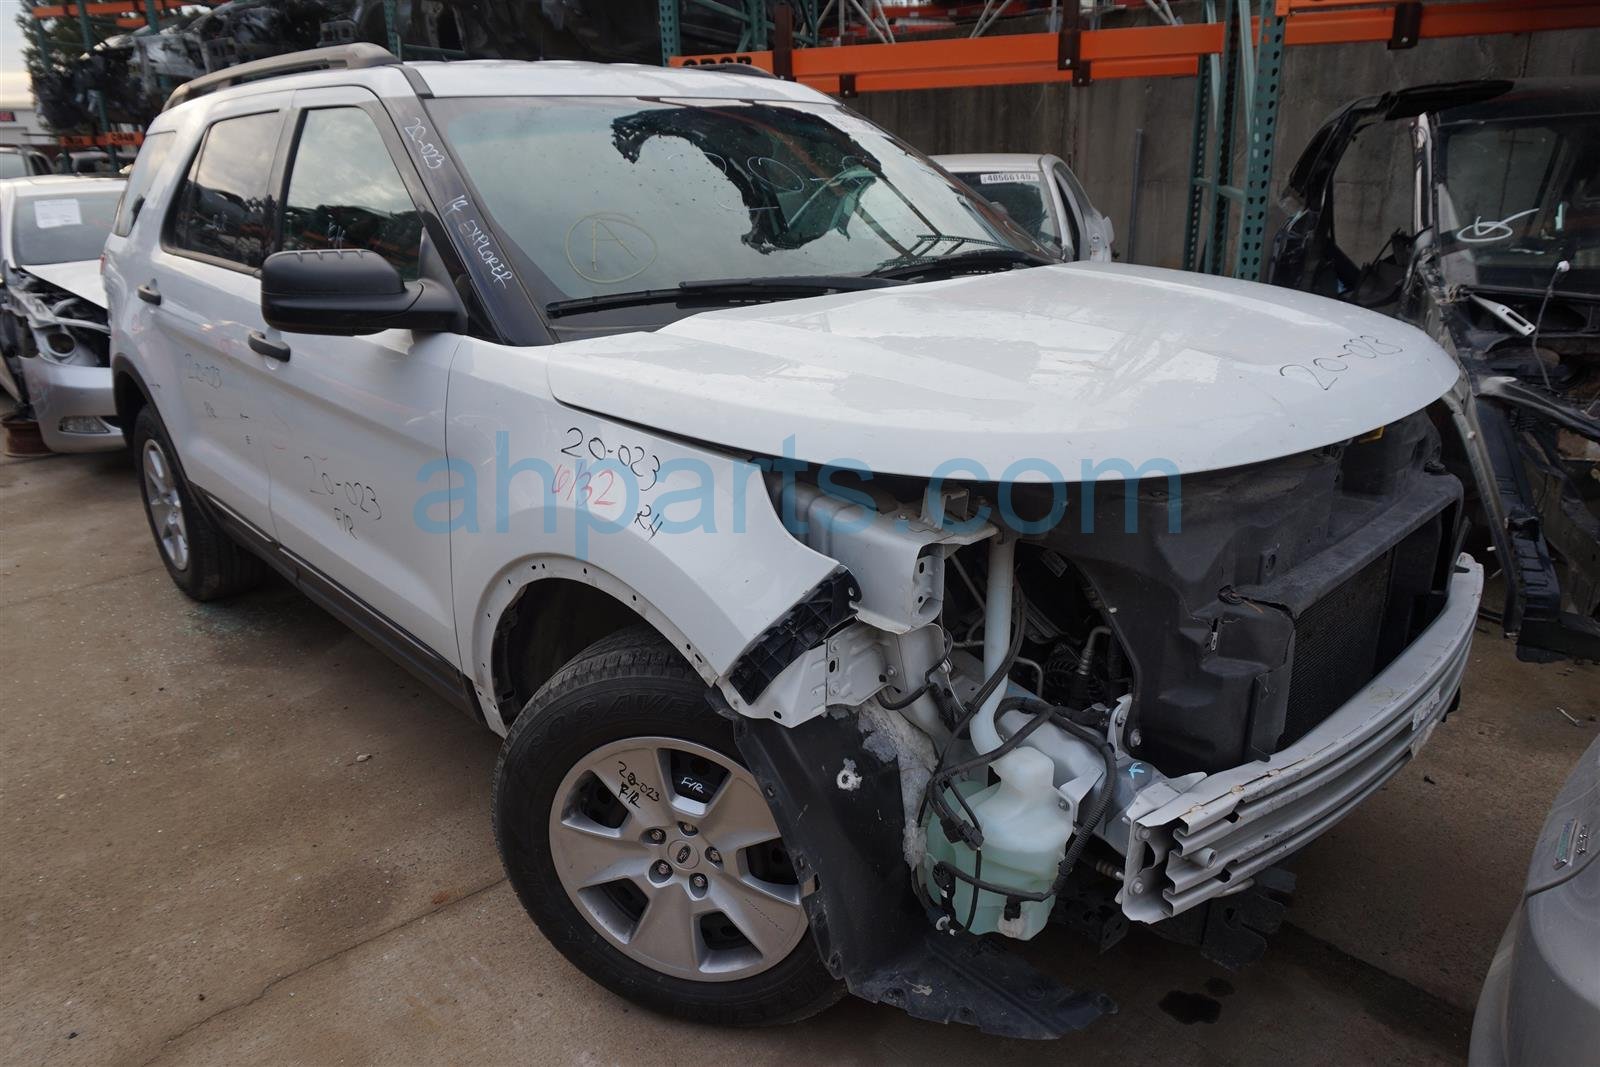 2014 Ford Explorer Replacement Parts